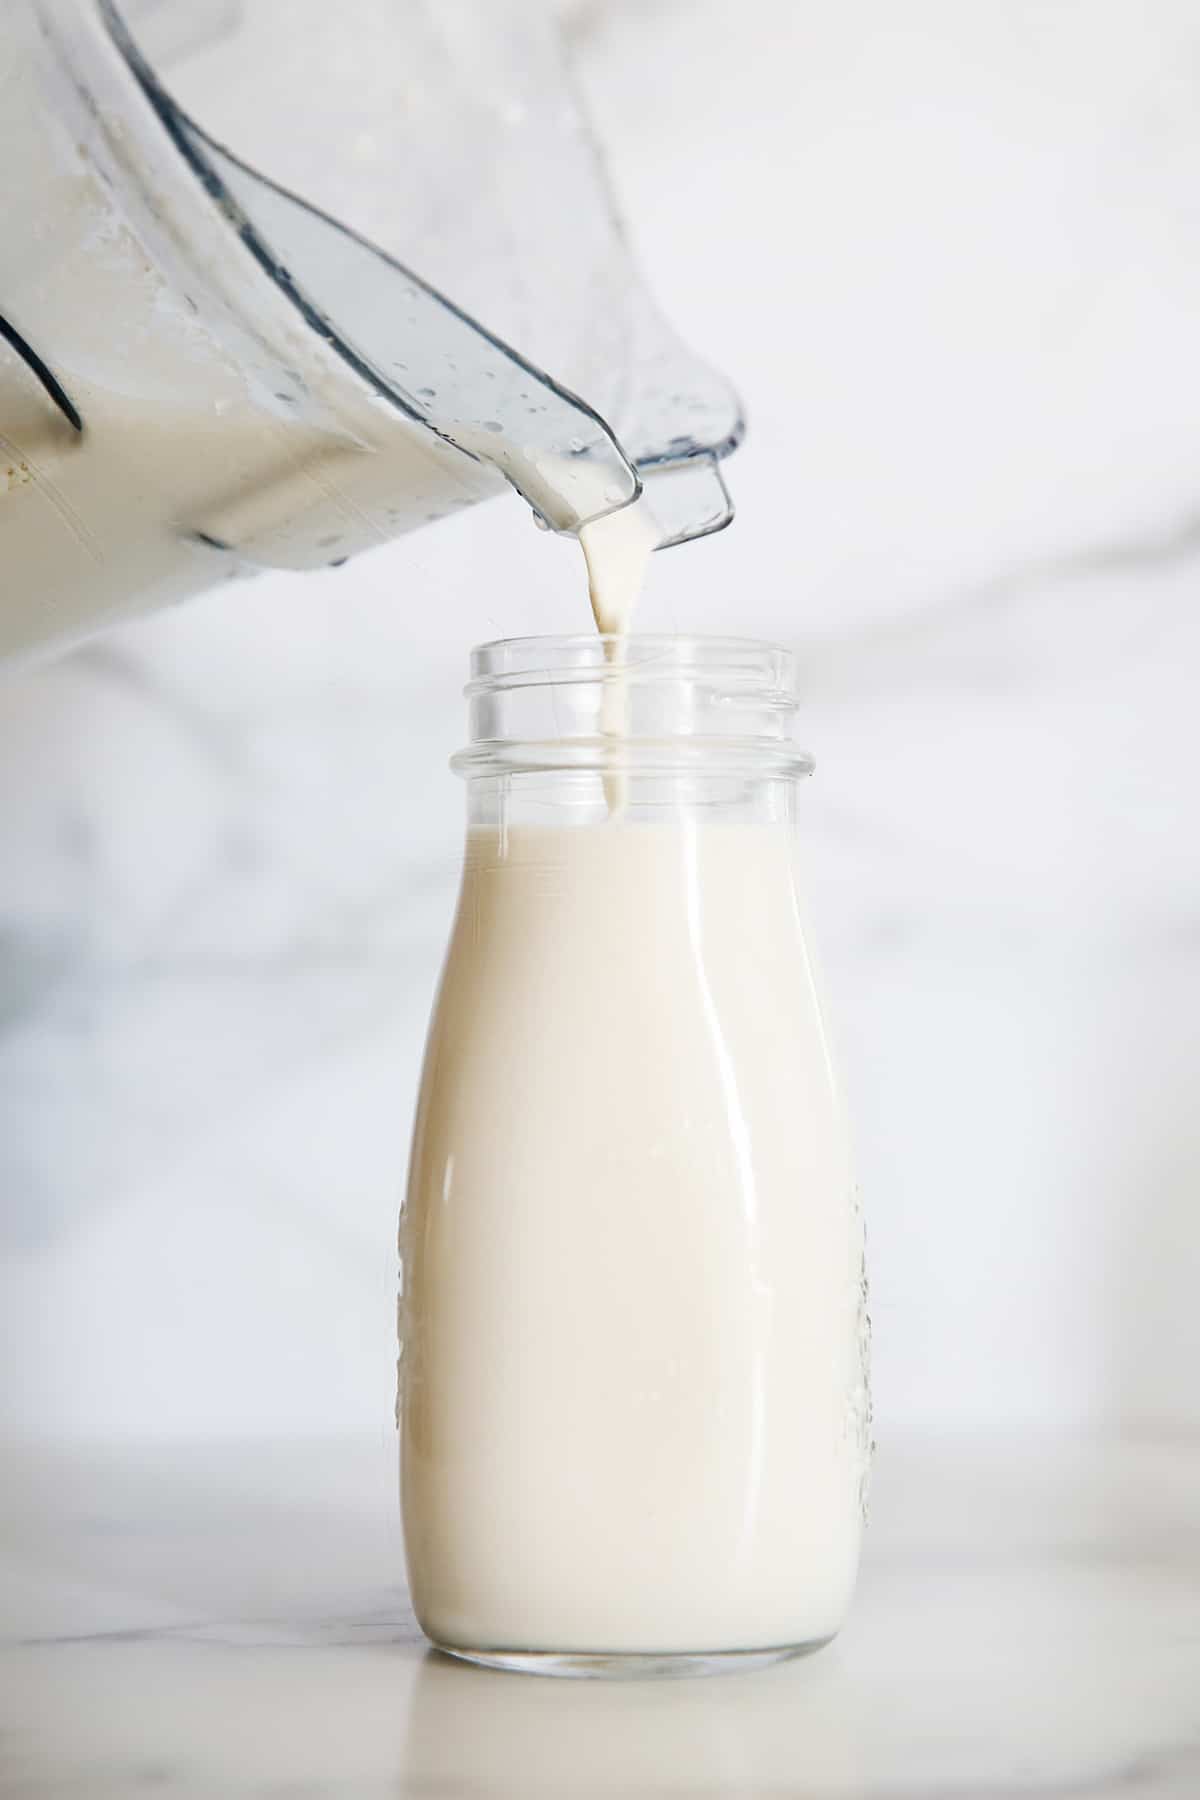 pouring finished cashew milk recipe into a glass jar